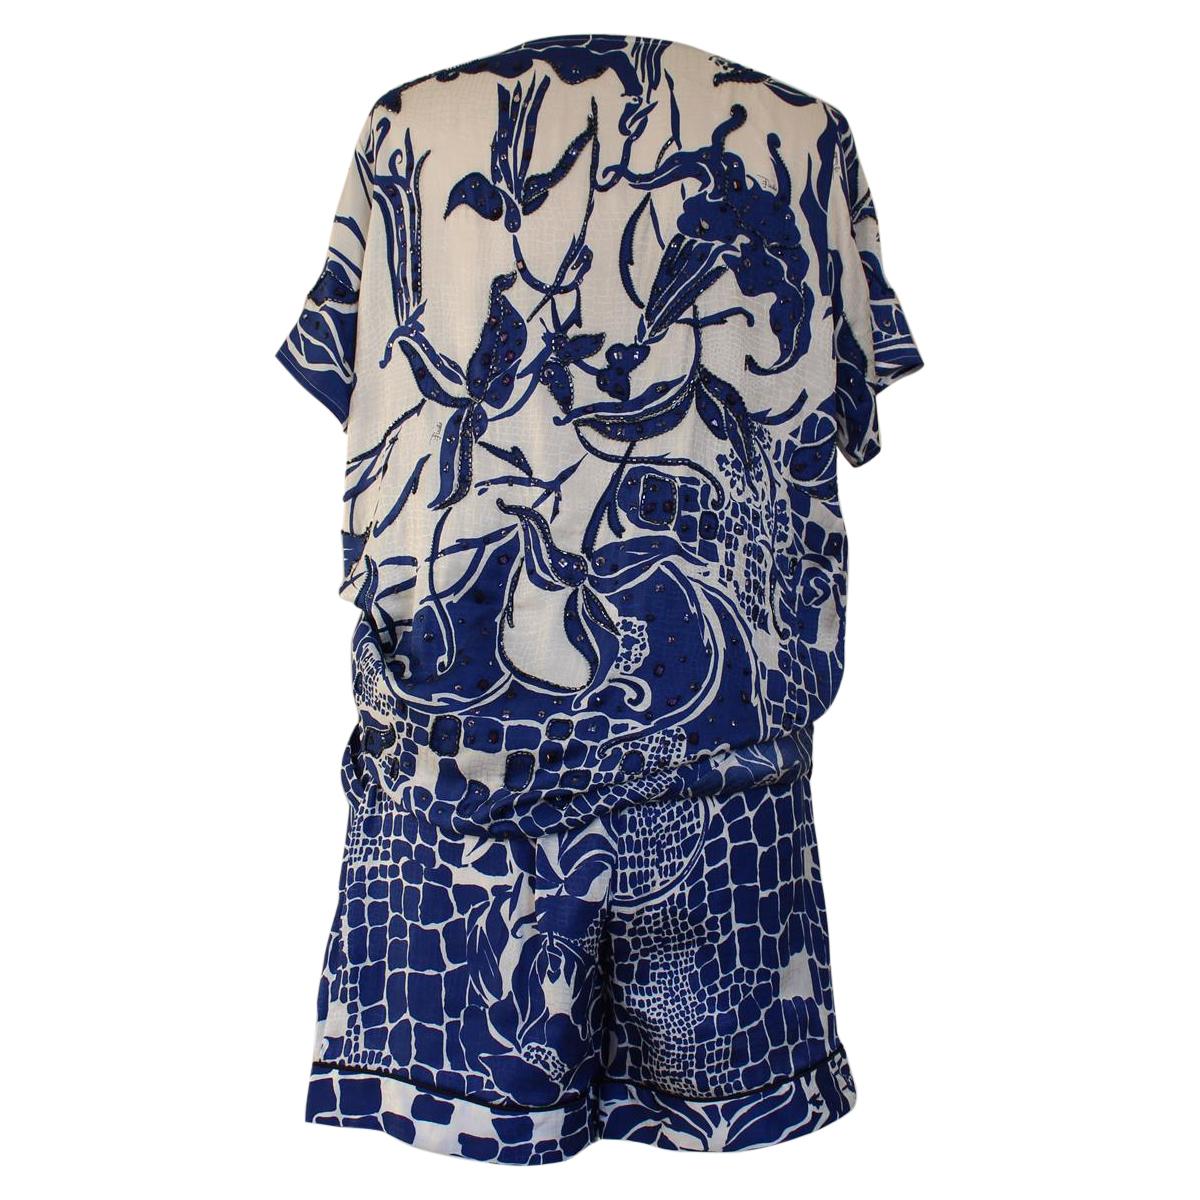 Emilio Pucci Firenze
Silk
Blue and white color
Blouse :
Shoulder / hem length cm 79 (31.1 inches)
Shoulder cm 39 (15.3 inches)
Four pockets Shorts
Length cm 43 (16.9 inches)
Waist cm 36 (14.17 inches)Worldwide express shipping included in the price !